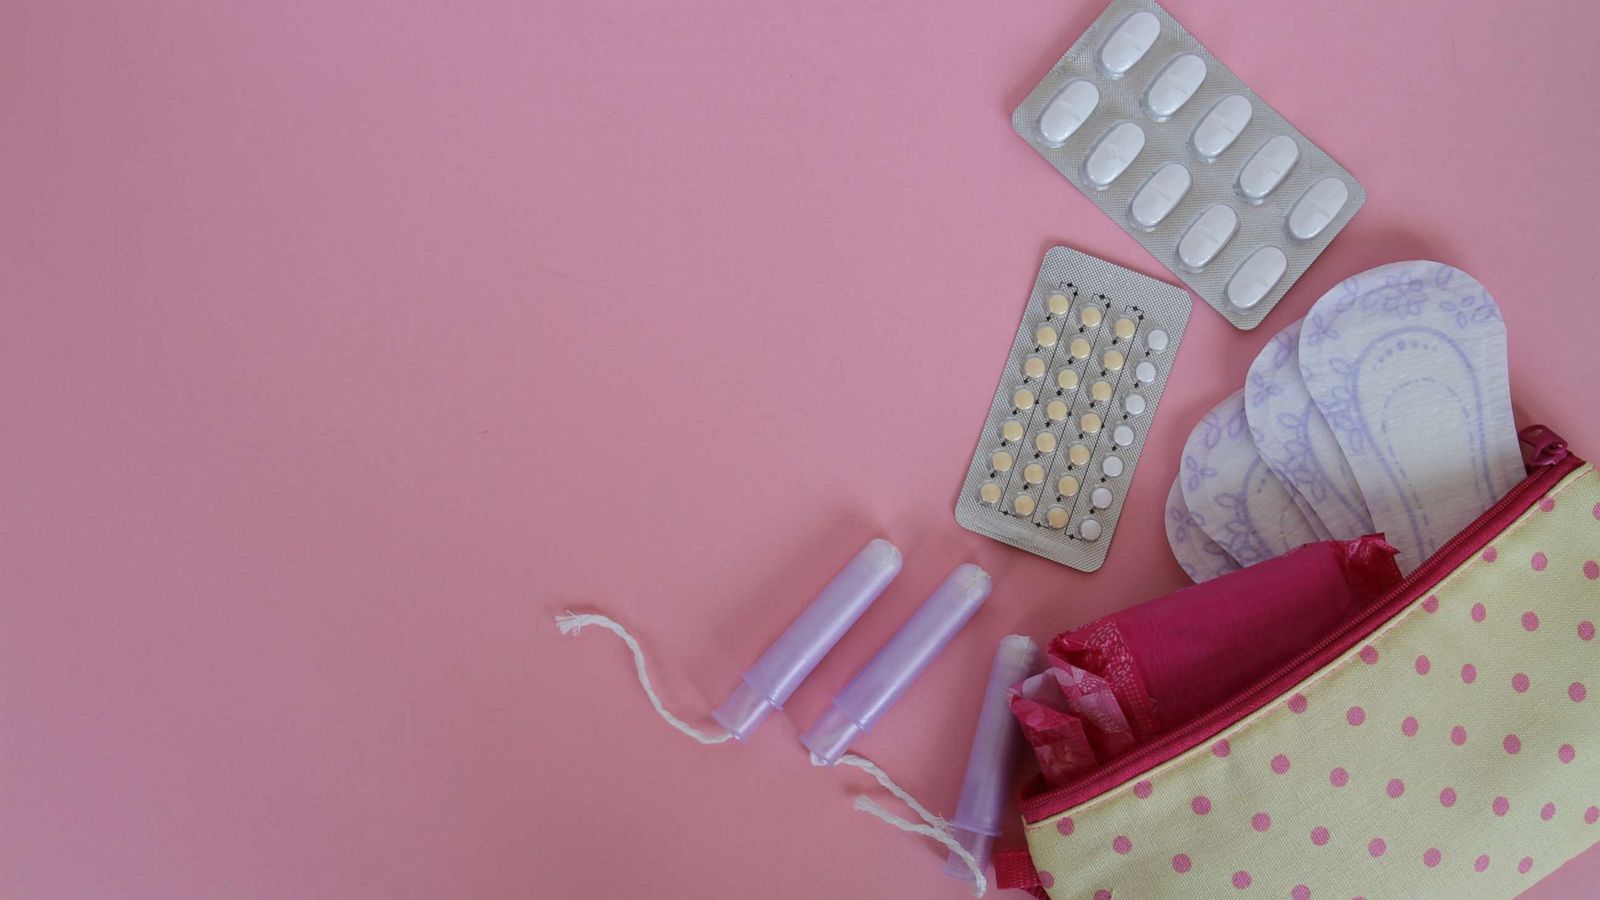 Amid a national tampon shortage, here are some doctor-approved alternatives  - Good Morning America